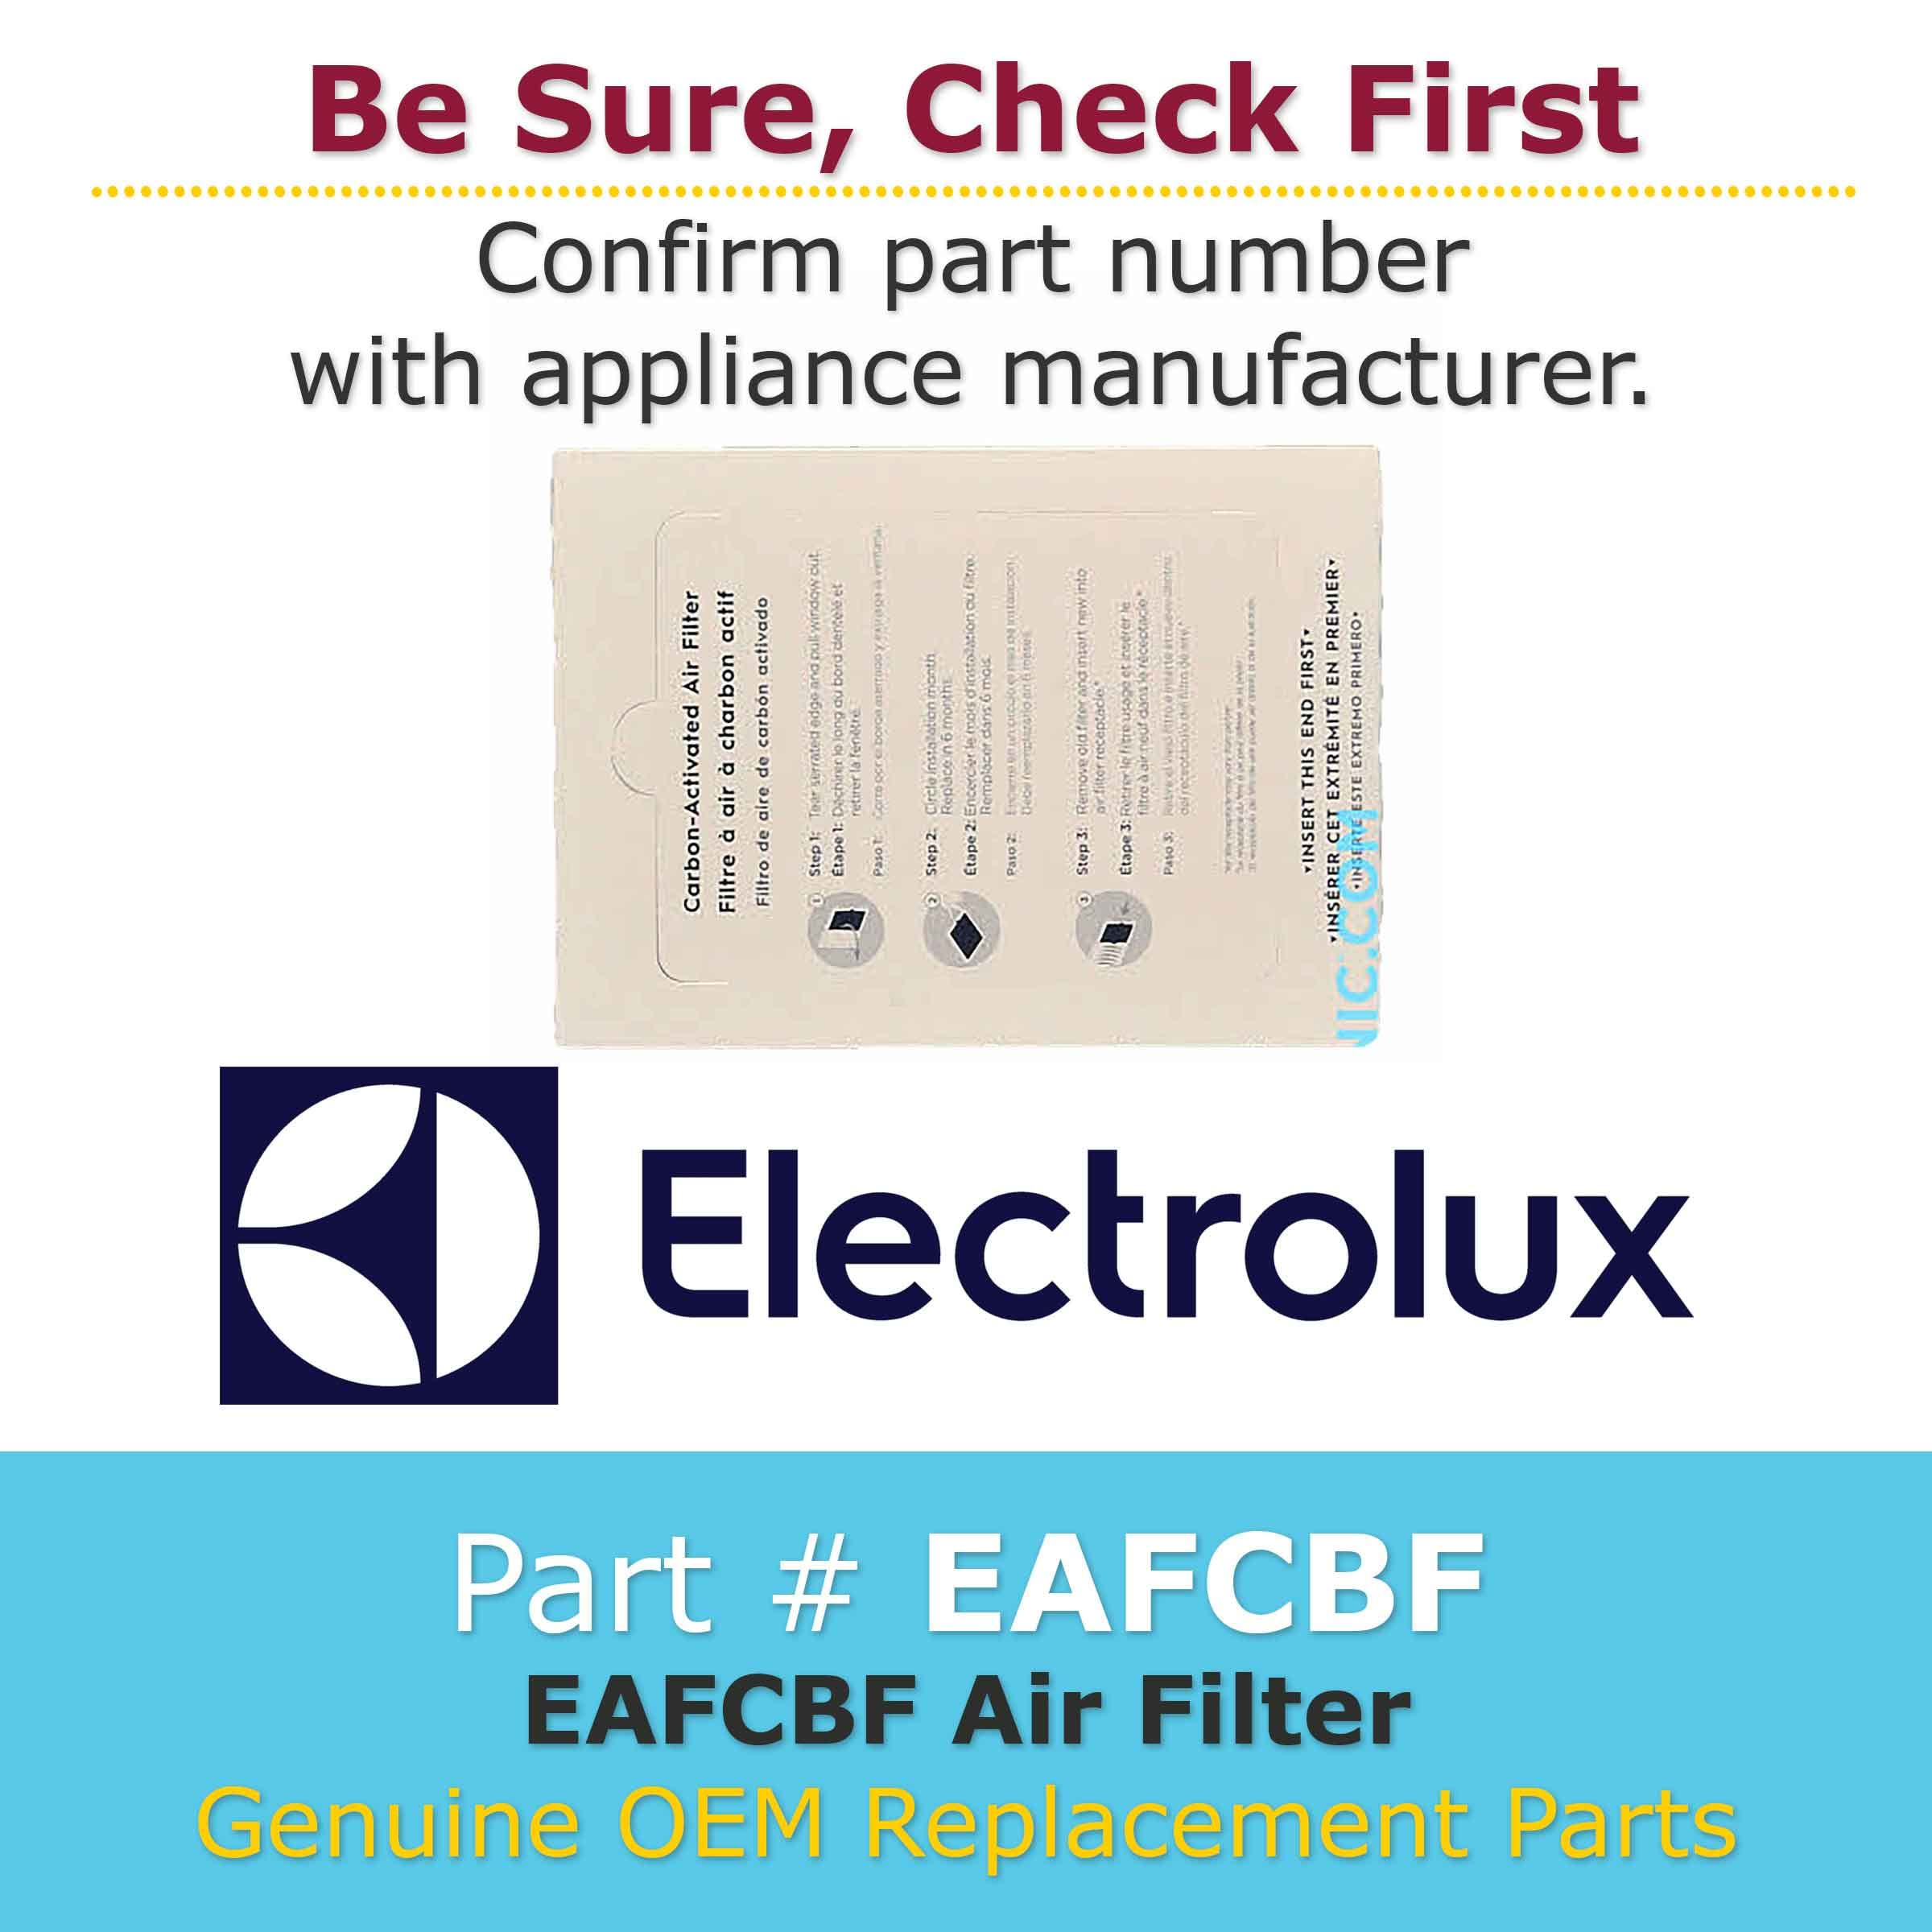 Electrolux EAFCBF Pure Advantage Air Filter, 1 Count (Pack of 1)